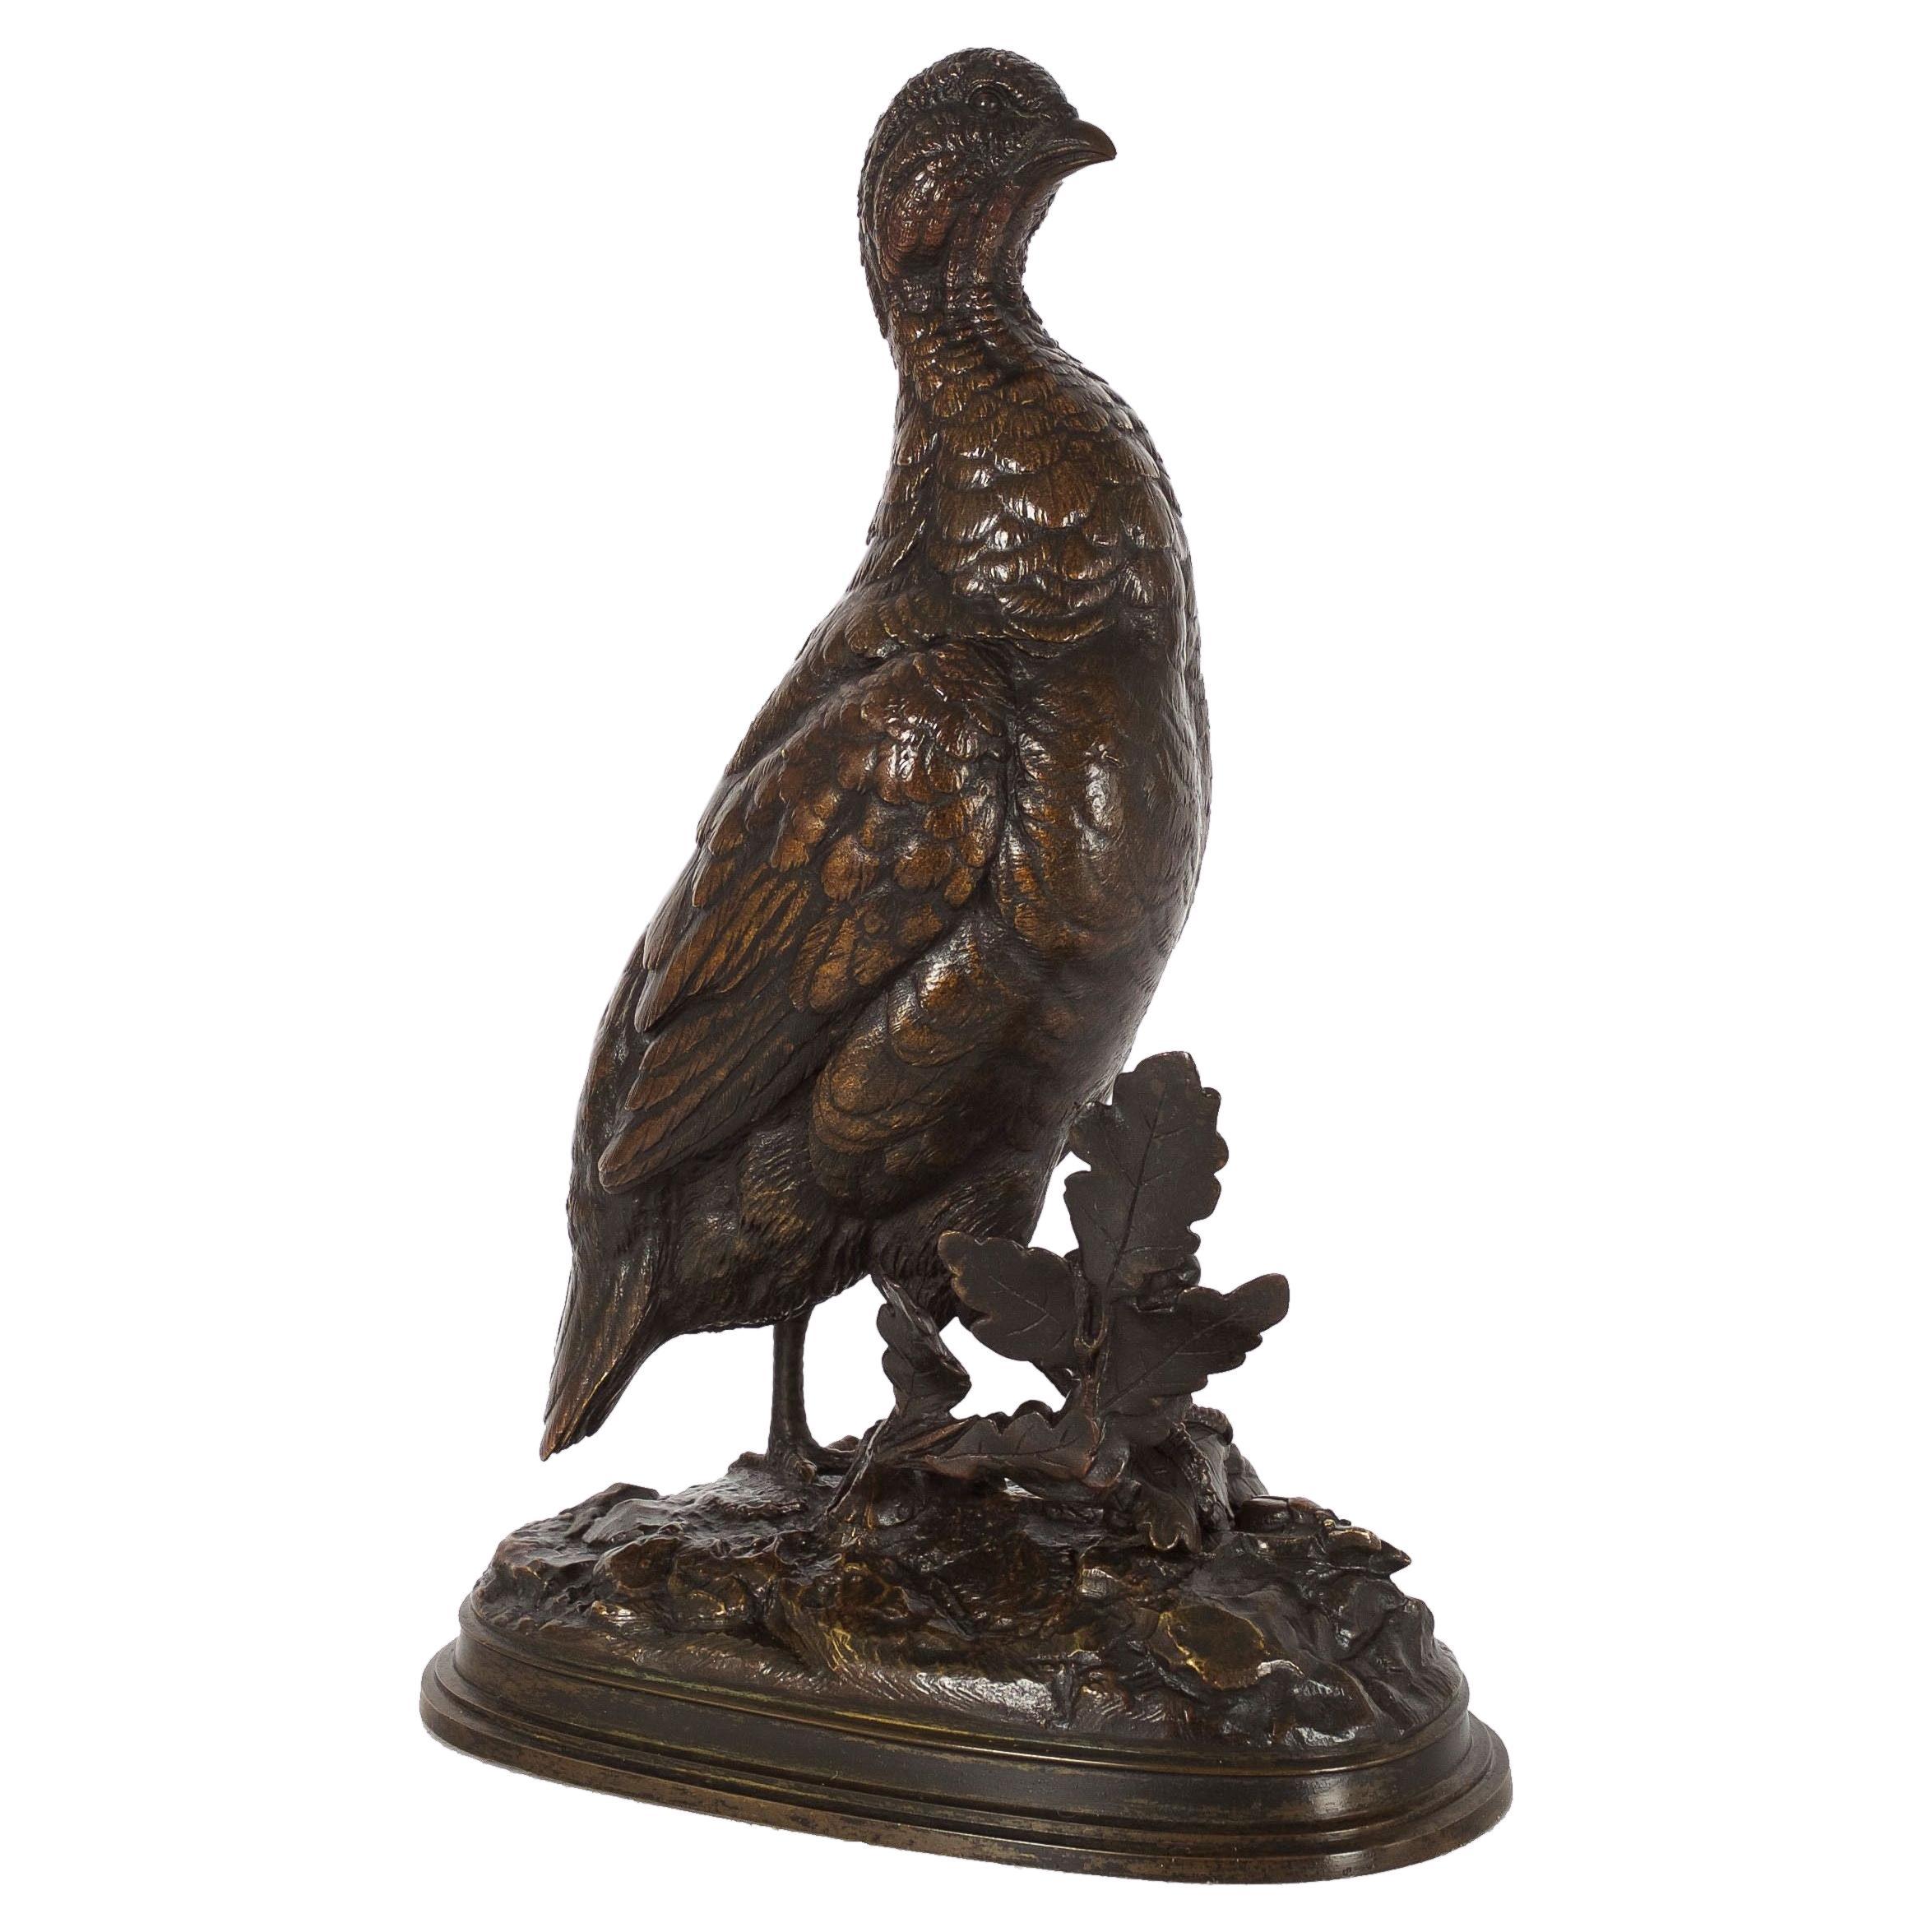 French Antique Bronze Sculpture of Walking Grouse by Paul Édouard Delabrierre